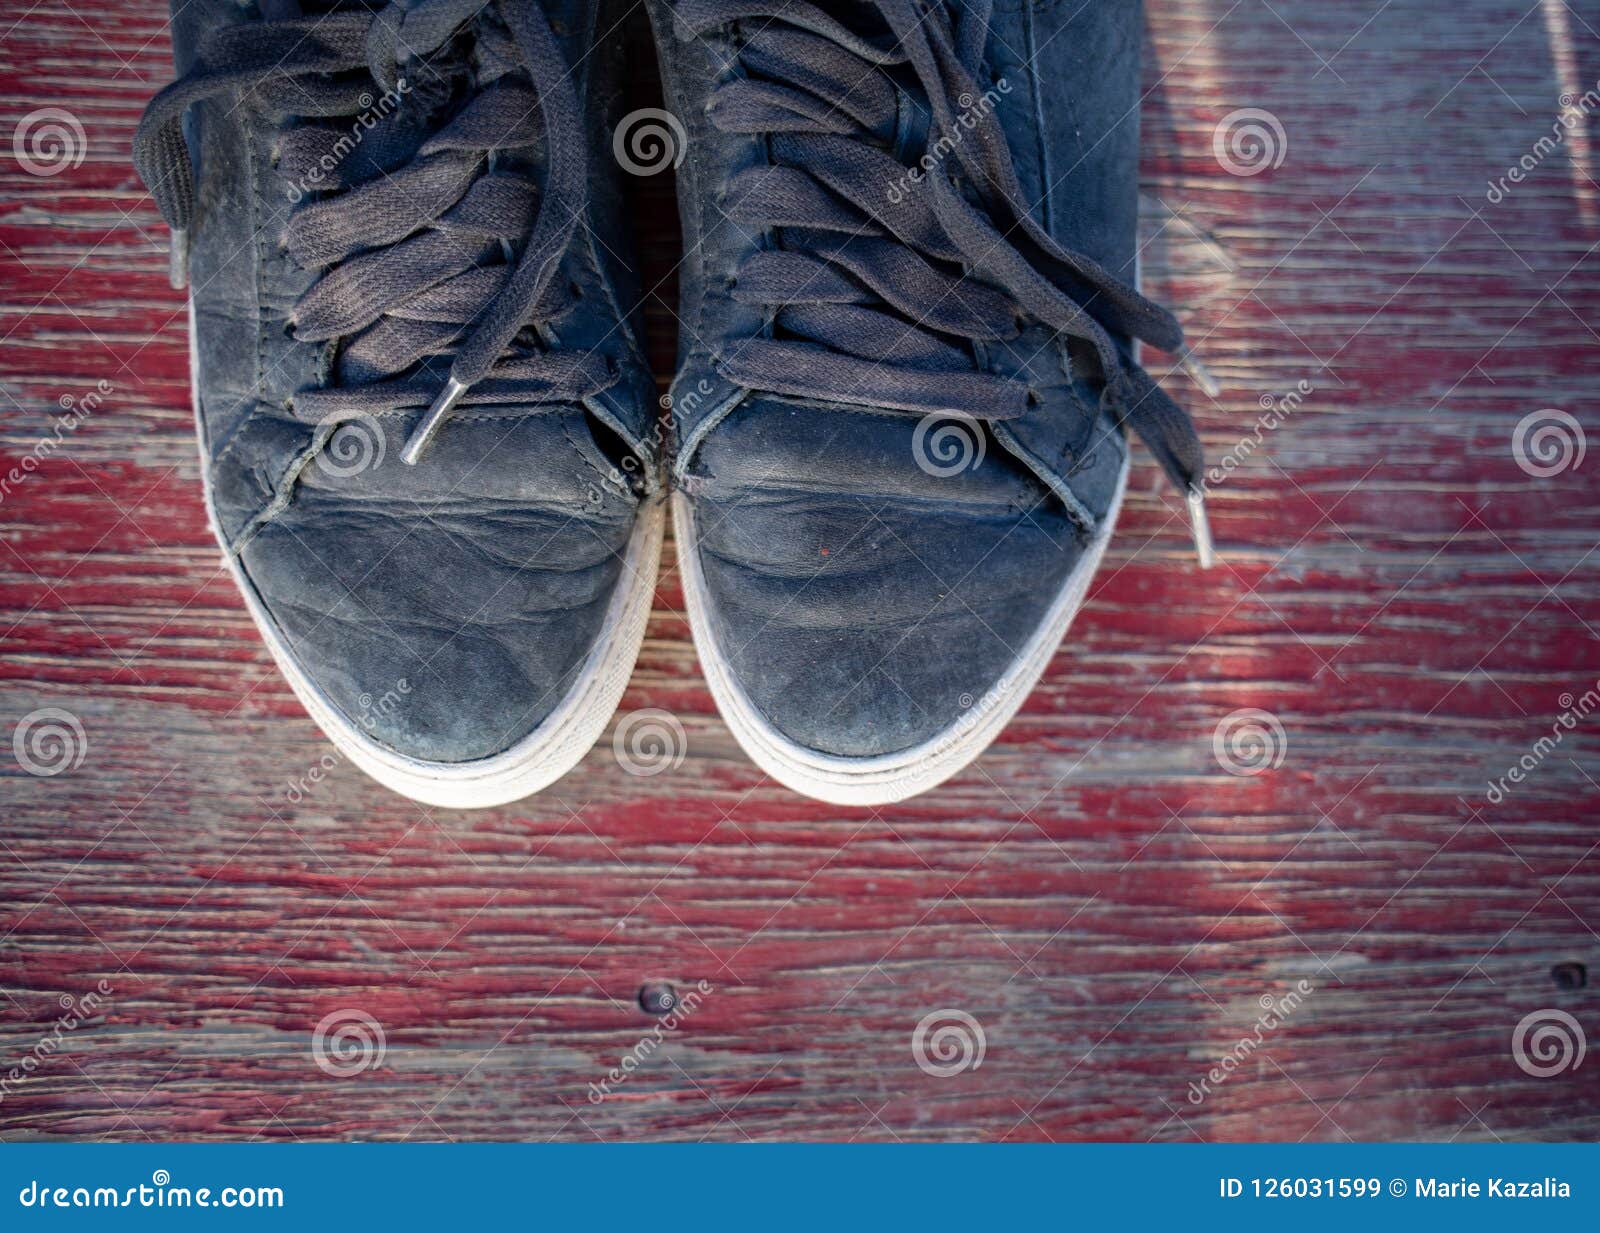 Worn Tennis Shoes and White Socks in Early Morning Sunlight after ...